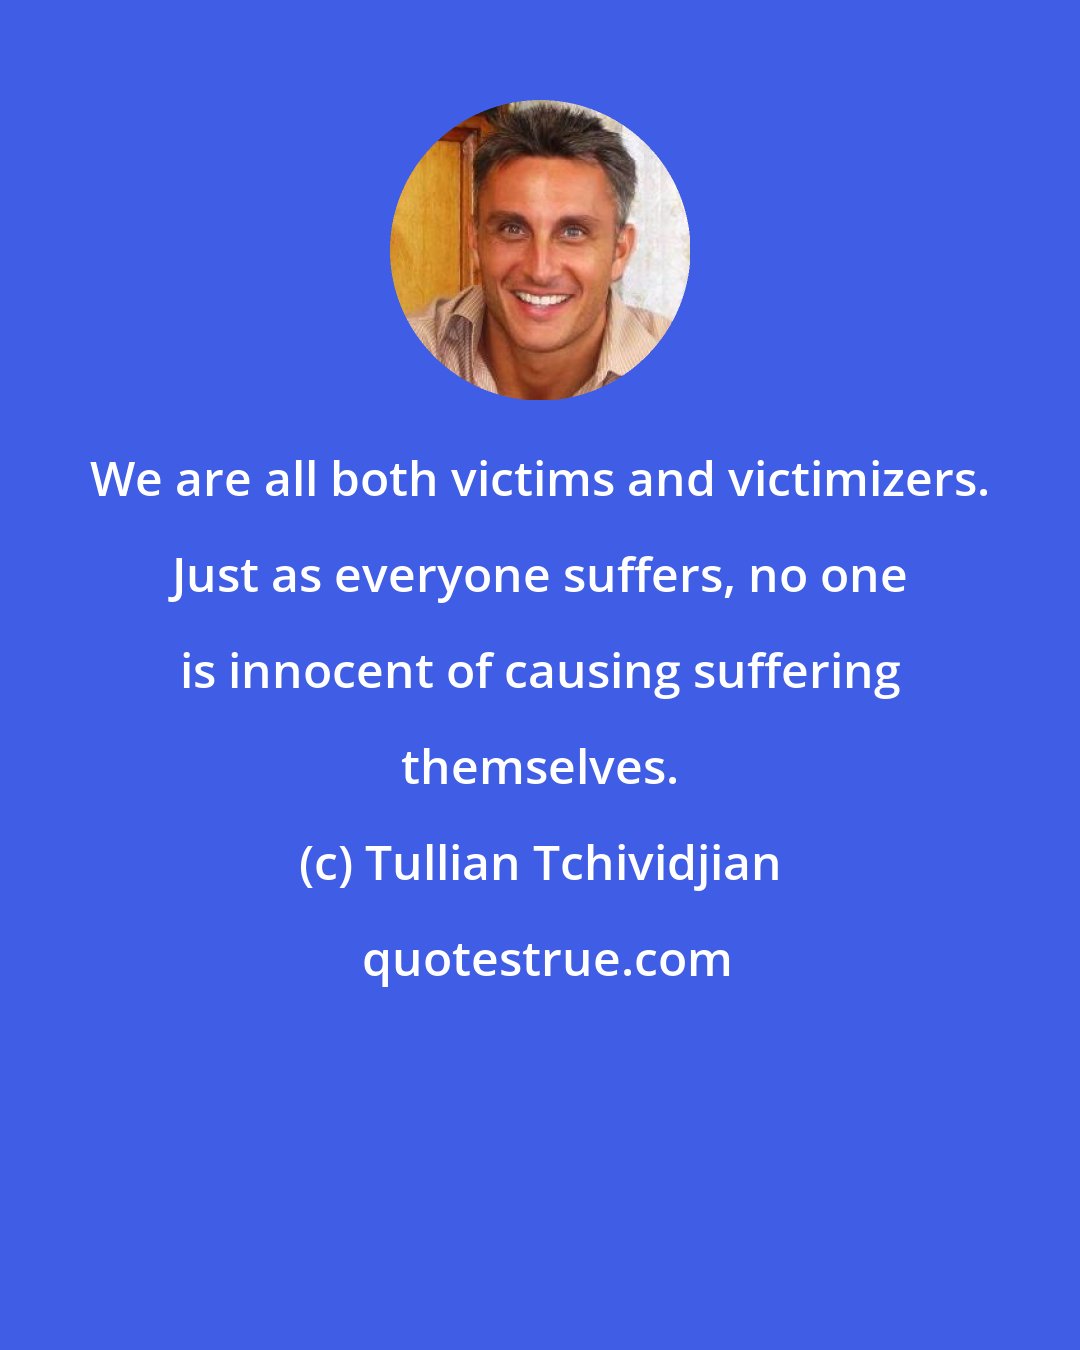 Tullian Tchividjian: We are all both victims and victimizers. Just as everyone suffers, no one is innocent of causing suffering themselves.